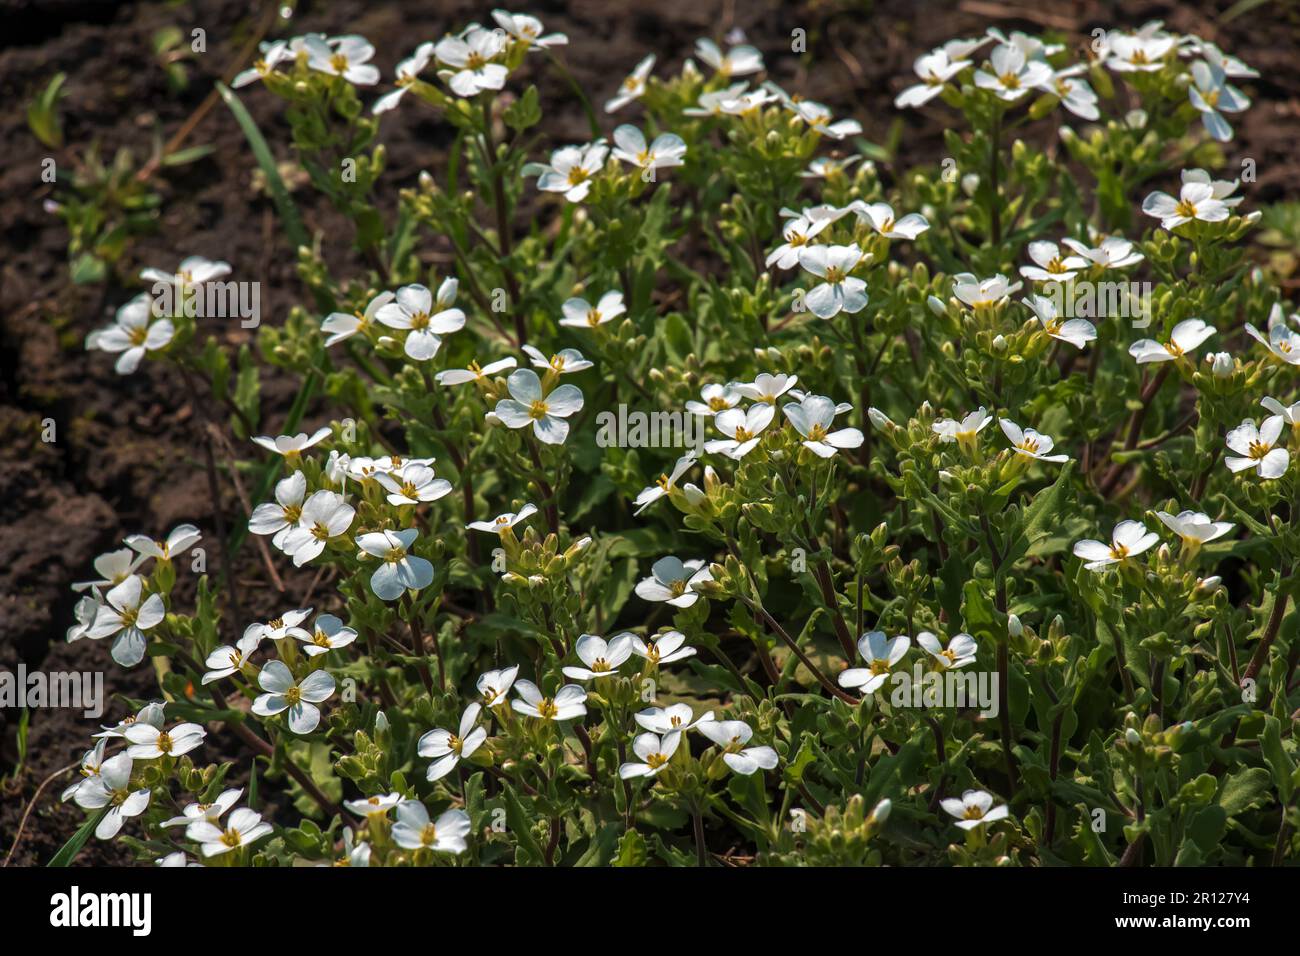 Arabis caucasica arabis mountain rock cress springtime flowering plant, causacian rockcress flowers with white petals in bloom, green leaves Stock Photo